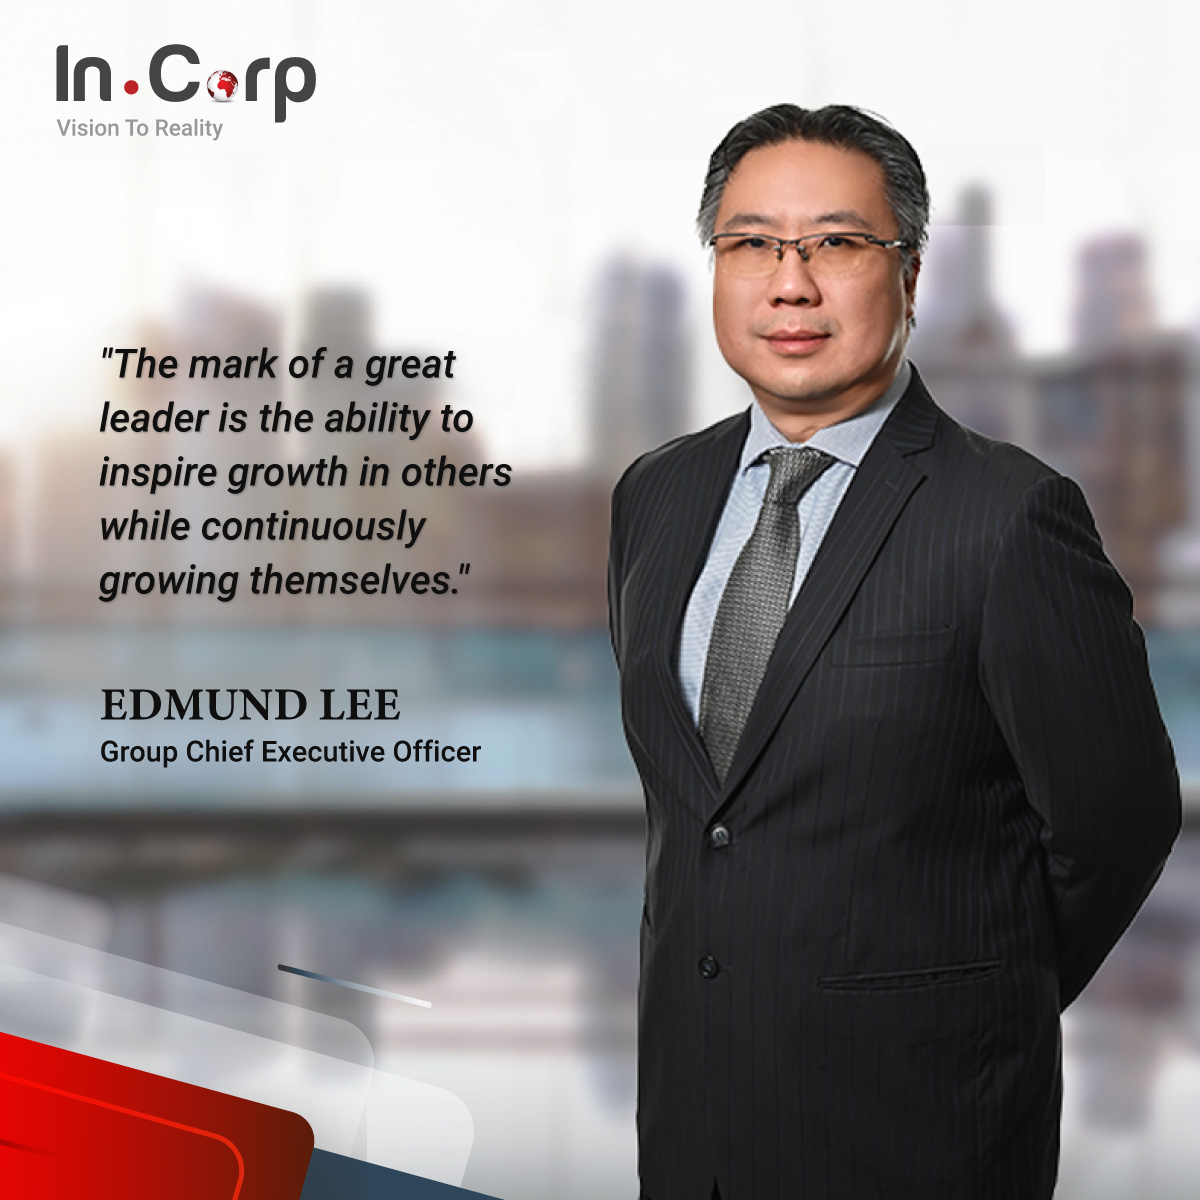 Continuous growth is paramount in all facets of life. Our Group CEO, Edmund Lee, shared his thoughts on how leaders can inspire their employees to grow by fostering their growth. Join us for a fulfilling career experience today! incorp.asia/careers #InCorpGlobal #Leadership